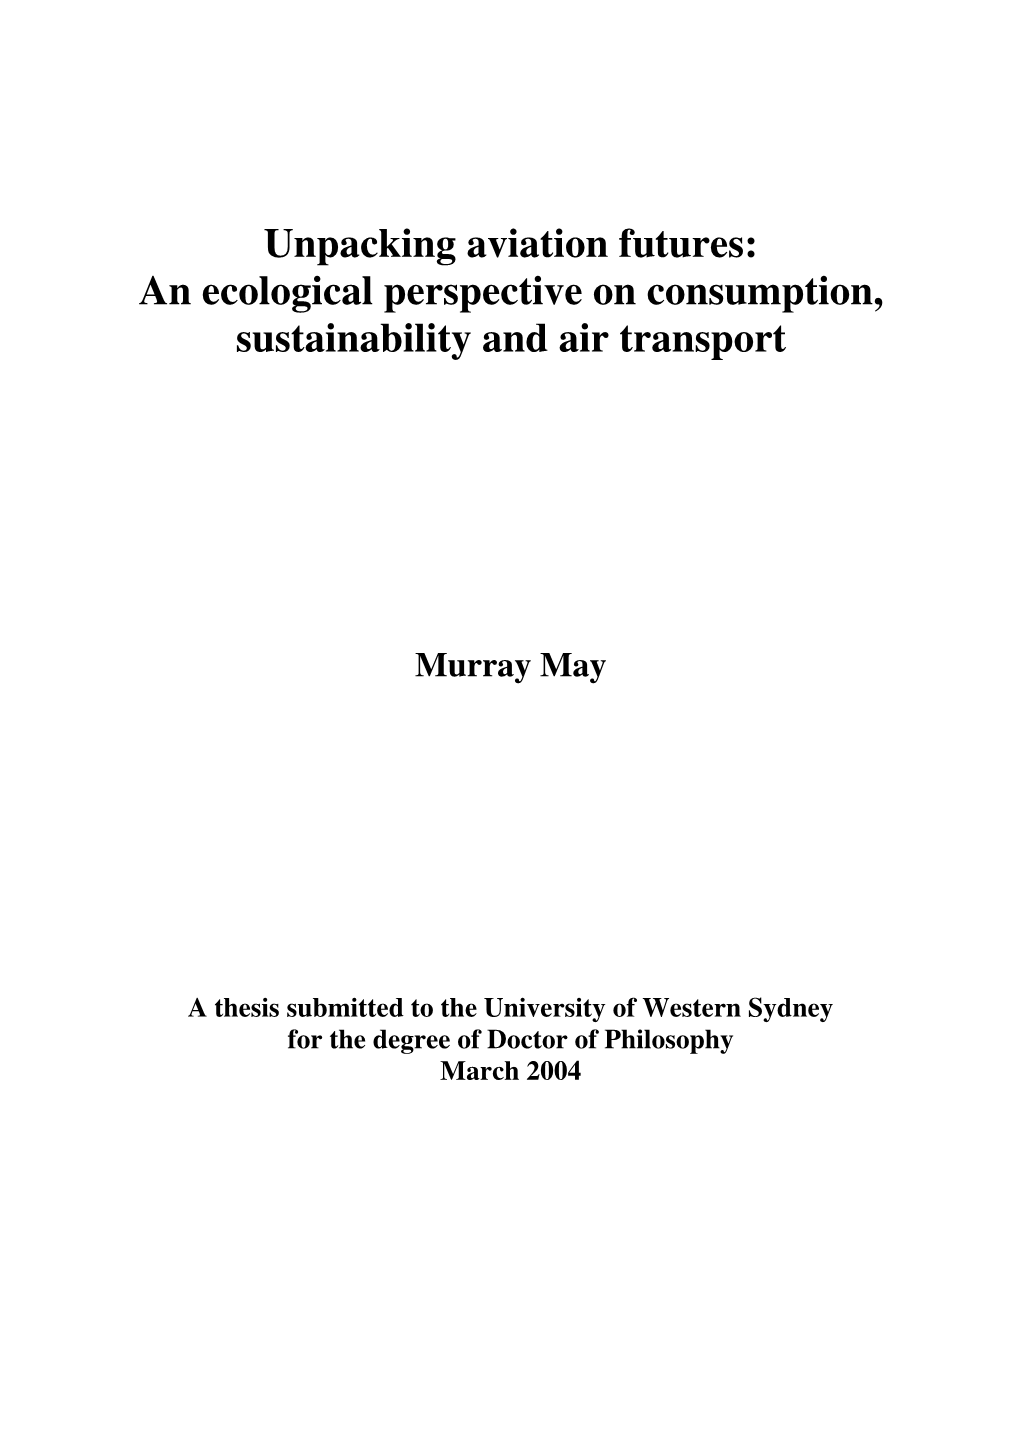 Unpacking Aviation Futures: an Ecological Perspective on Consumption, Sustainability and Air Transport